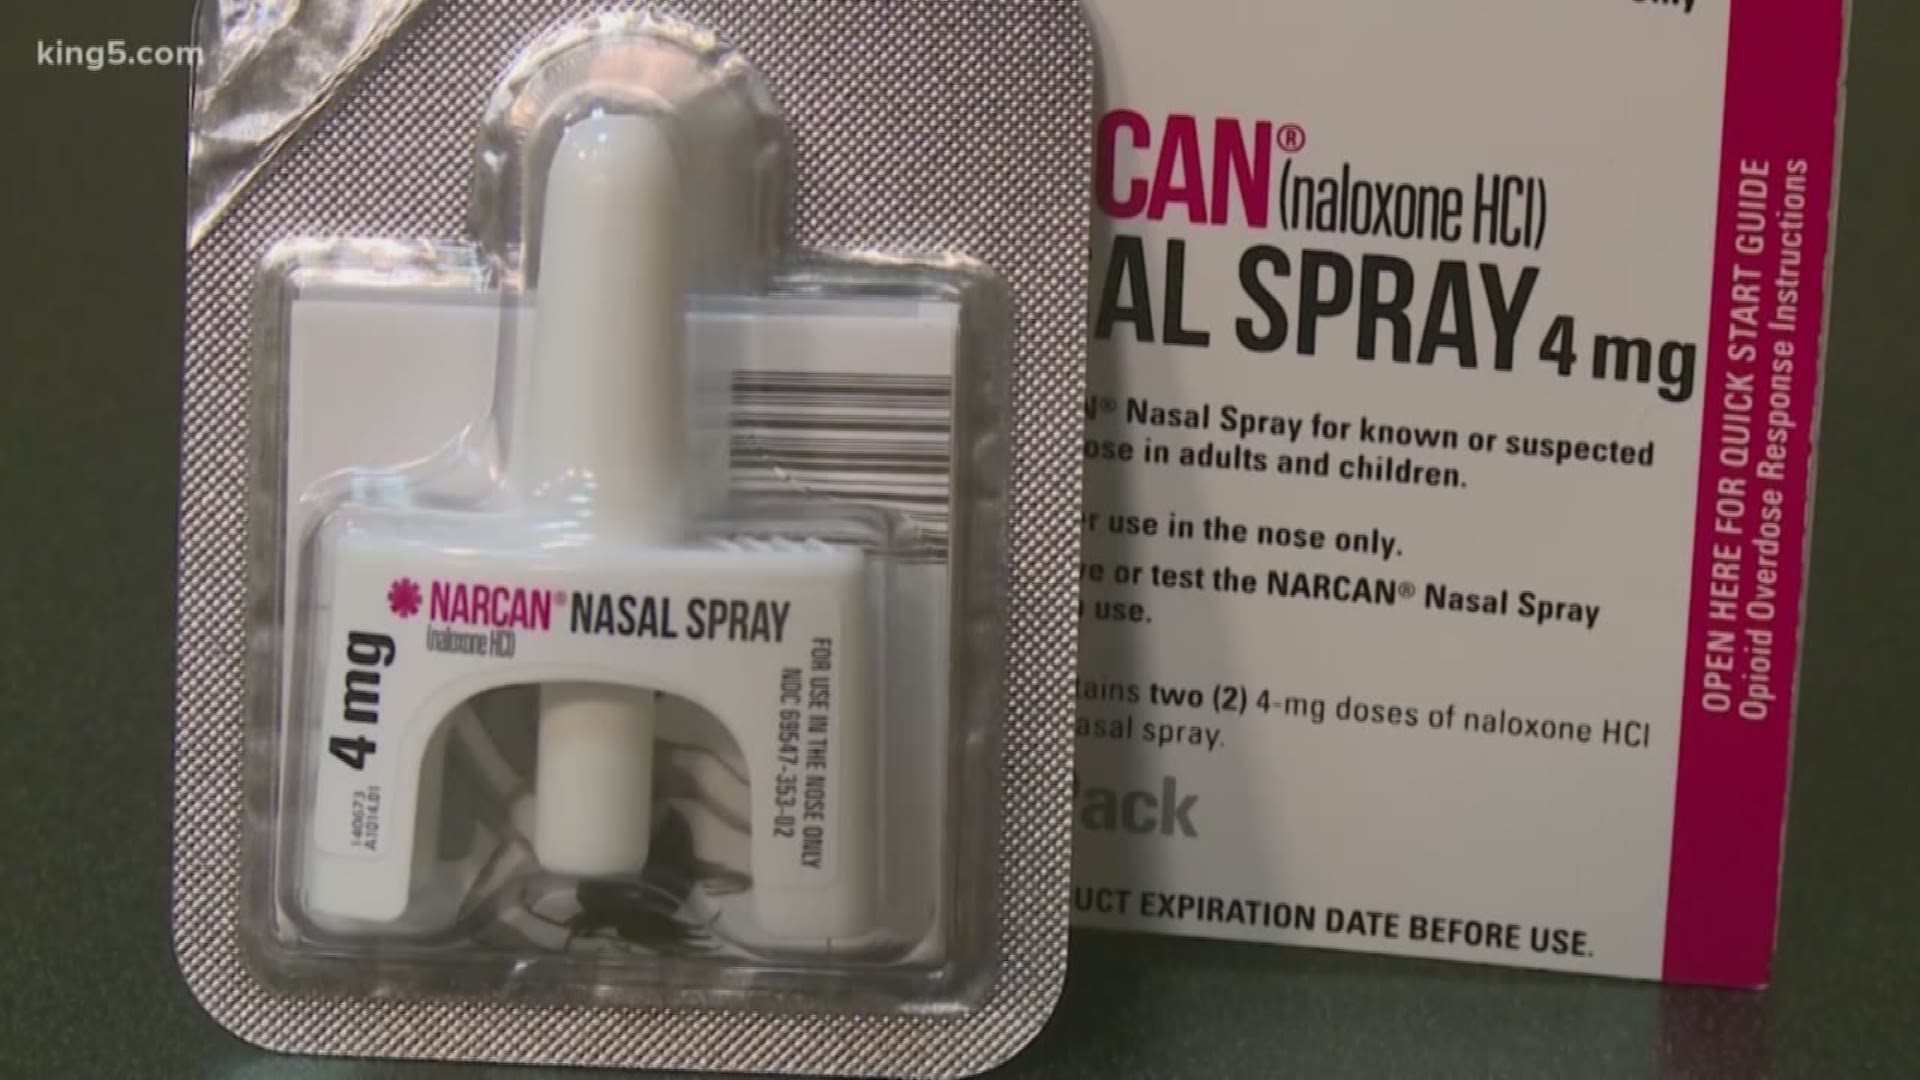 In some of these schools, any authoritative figure could administer Narcan